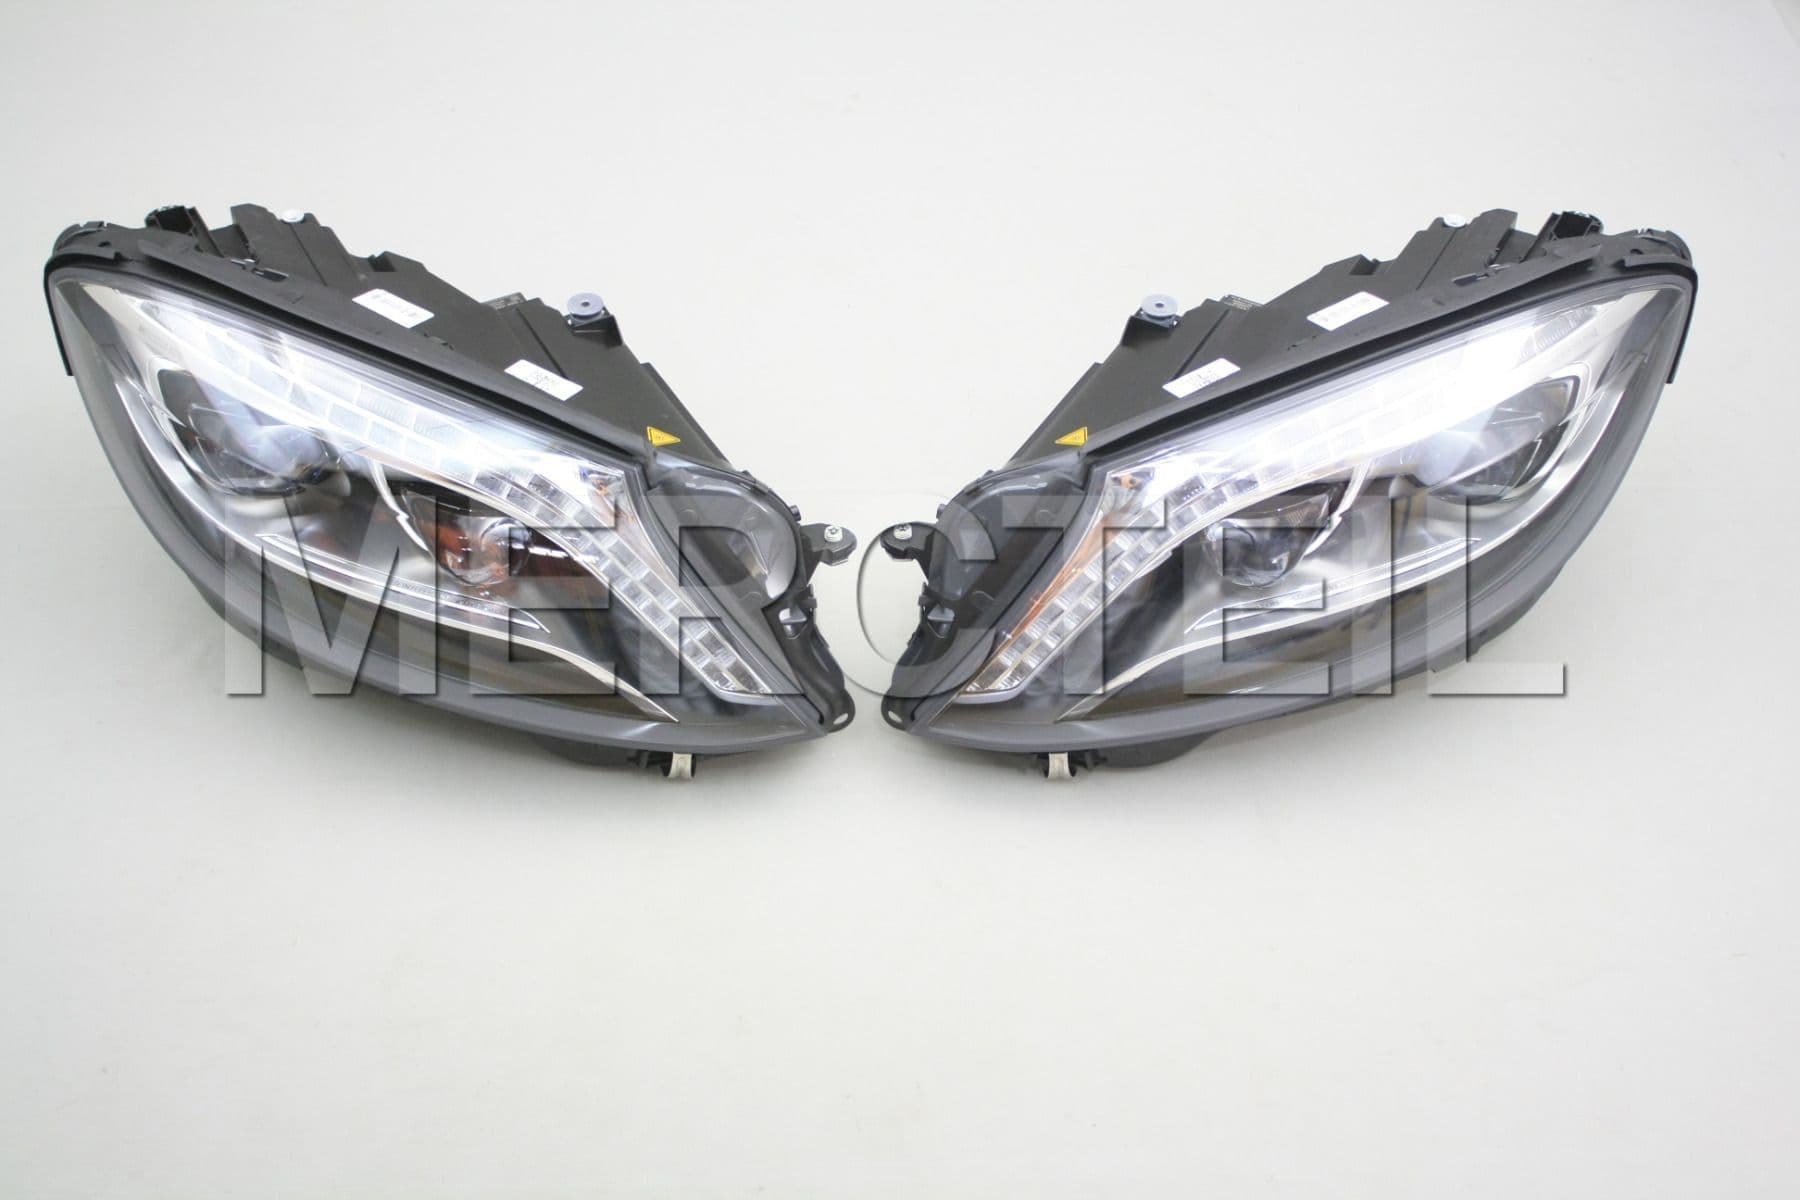 Full Dynamic LED Headlights for S Class W222 (part number: 	
A2228208061)